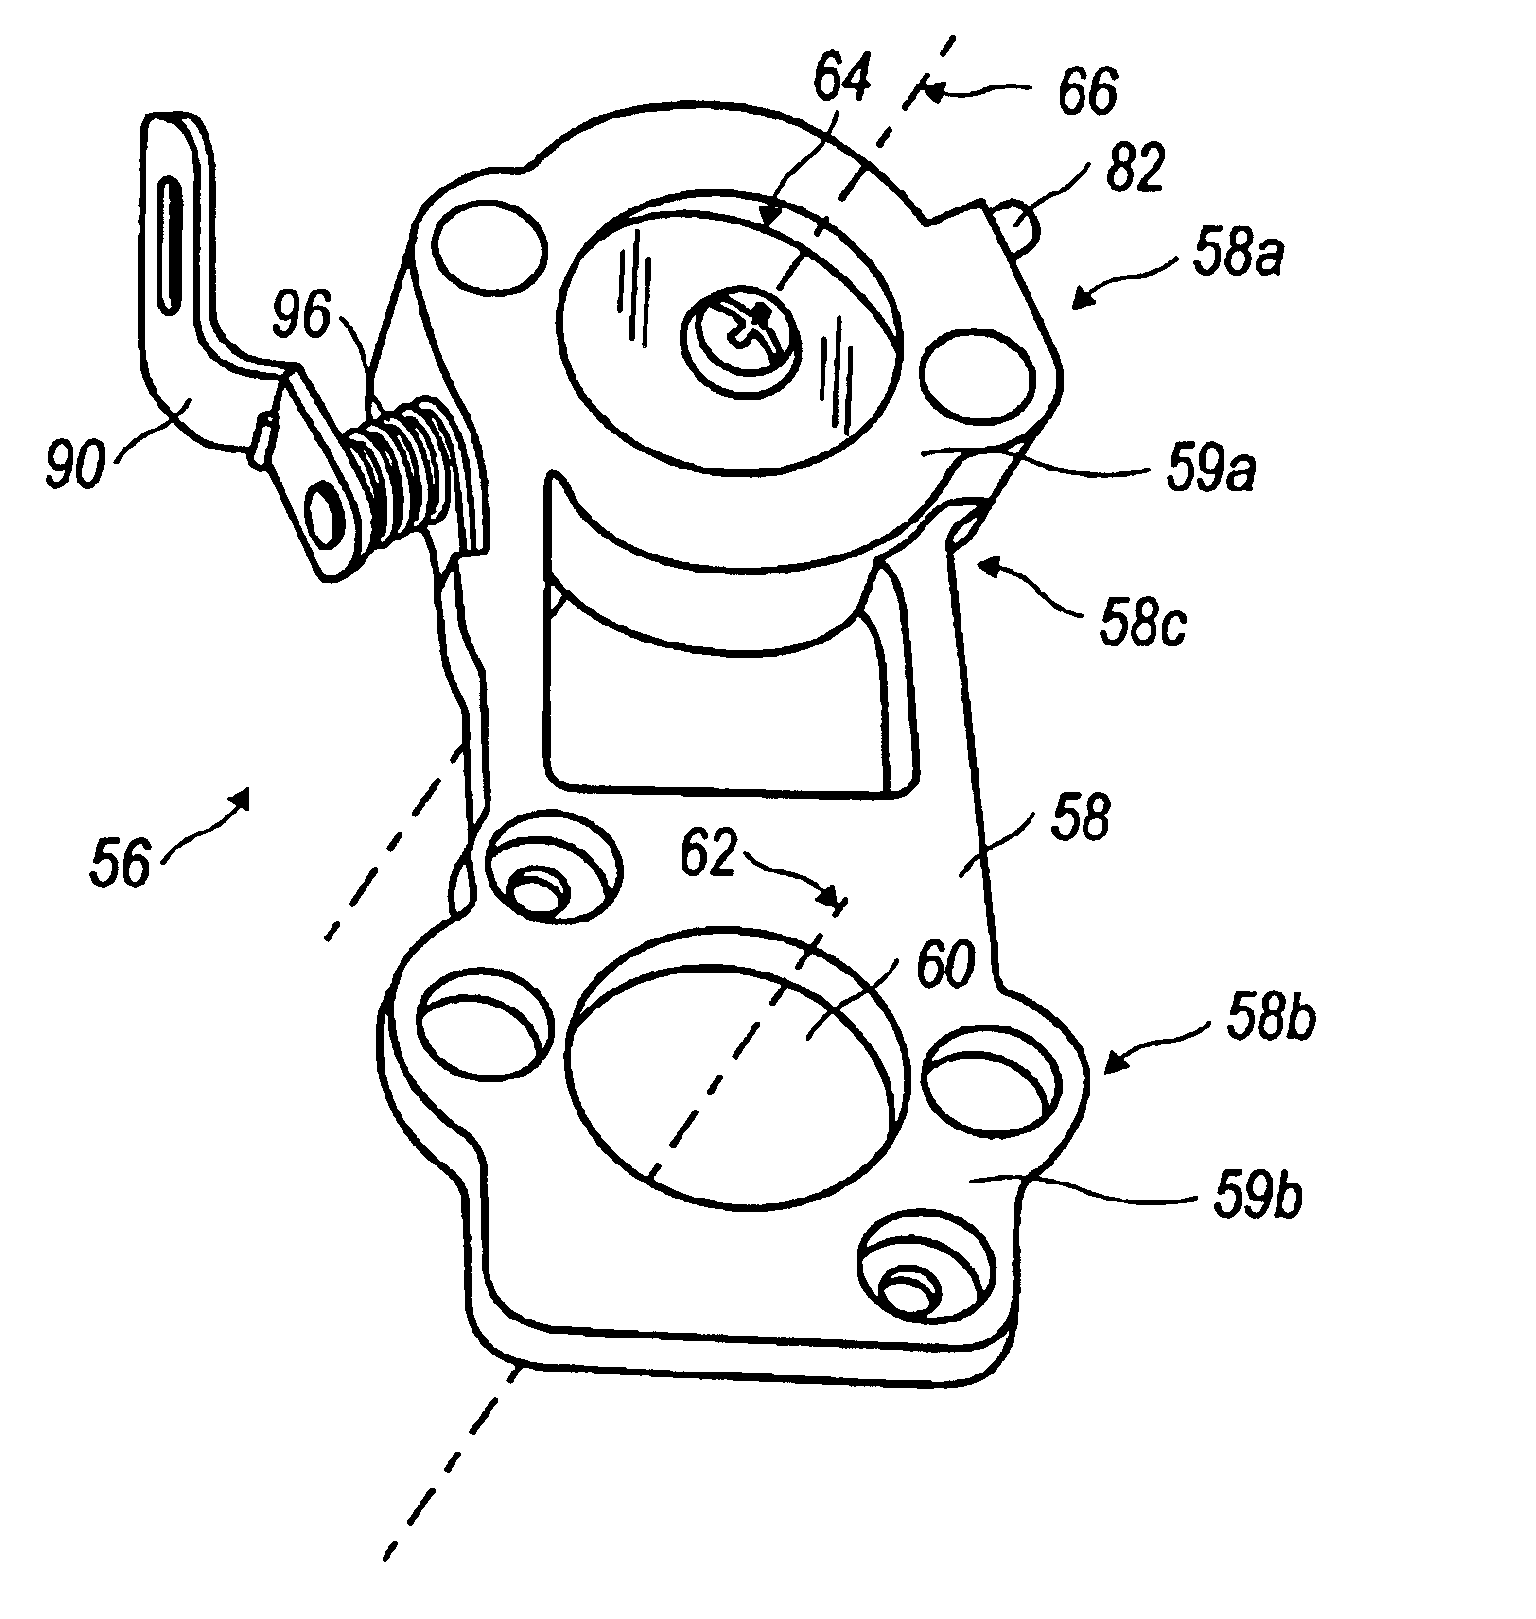 Valve for control of additional air for a two-stroke engine